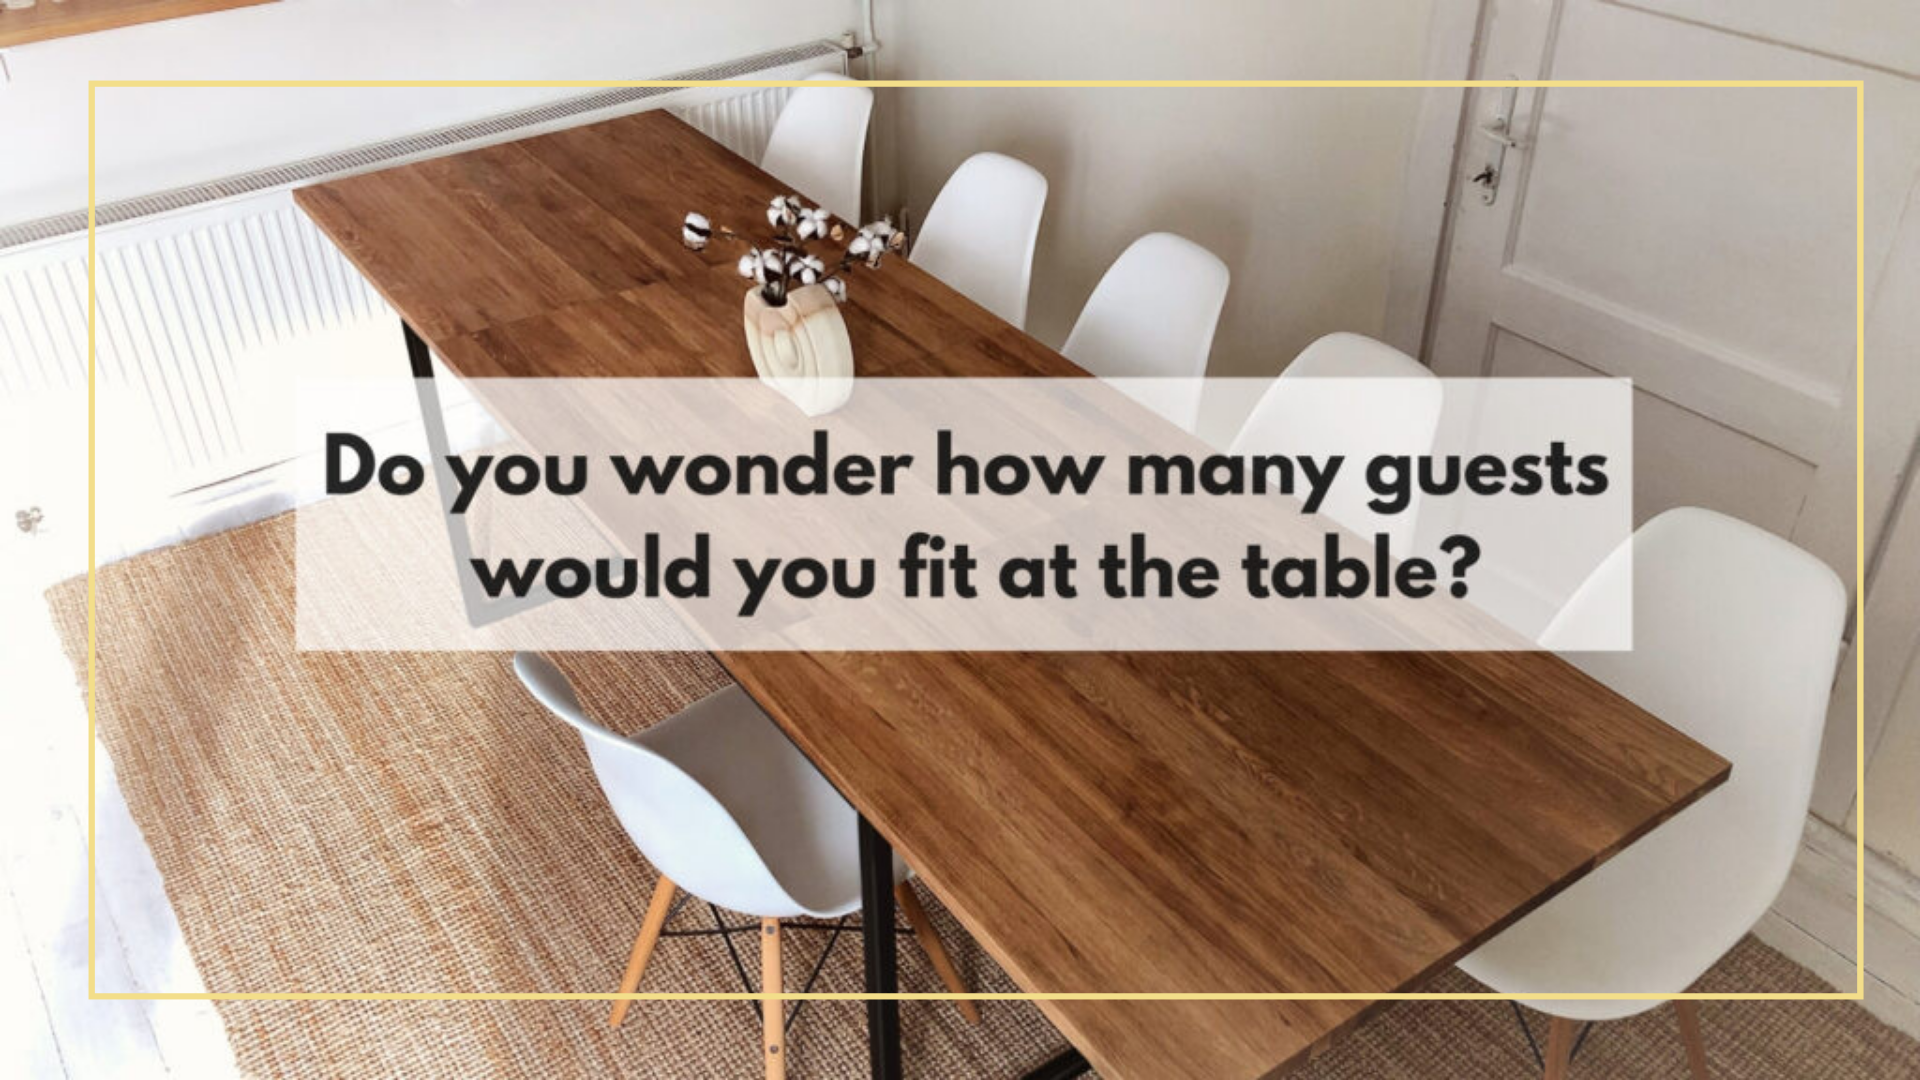 Do you wonder how many guests would you fit at your oak dining the table? Choose table size!